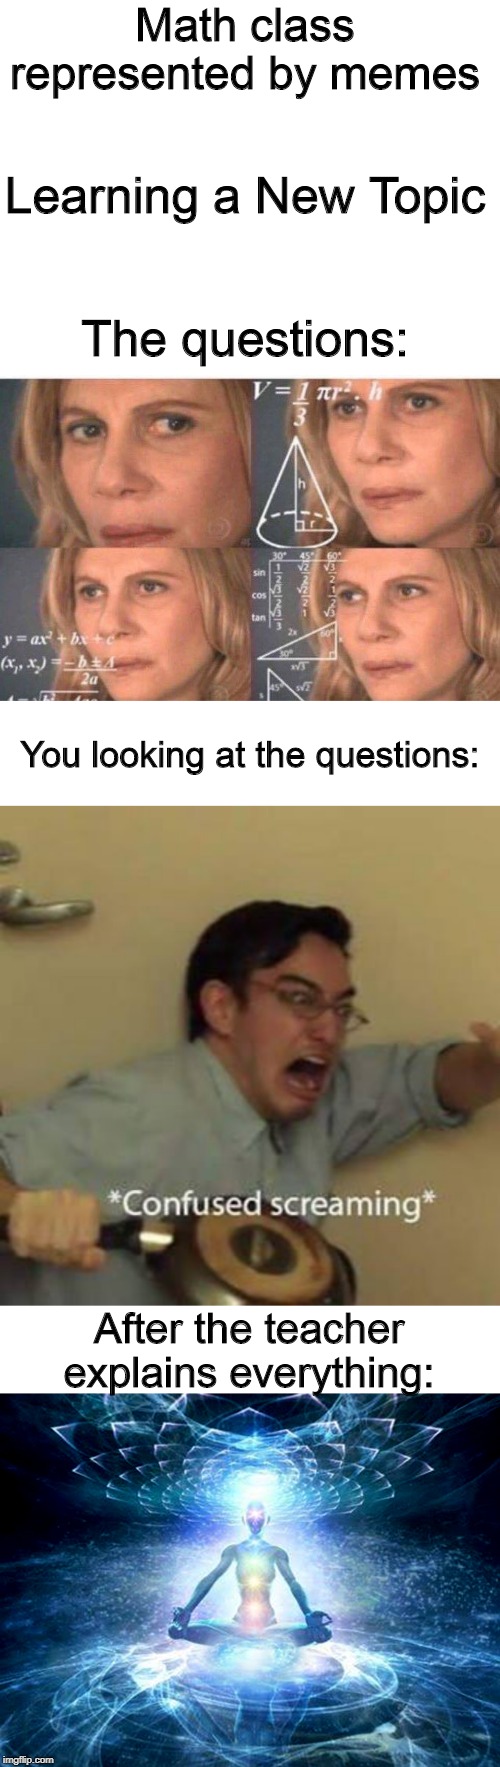 A first in a new series | Math class represented by memes; Learning a New Topic; The questions:; You looking at the questions:; After the teacher explains everything: | image tagged in blank white template,math lady/confused lady,confused screaming,enlightened mind,math class,new math topic | made w/ Imgflip meme maker